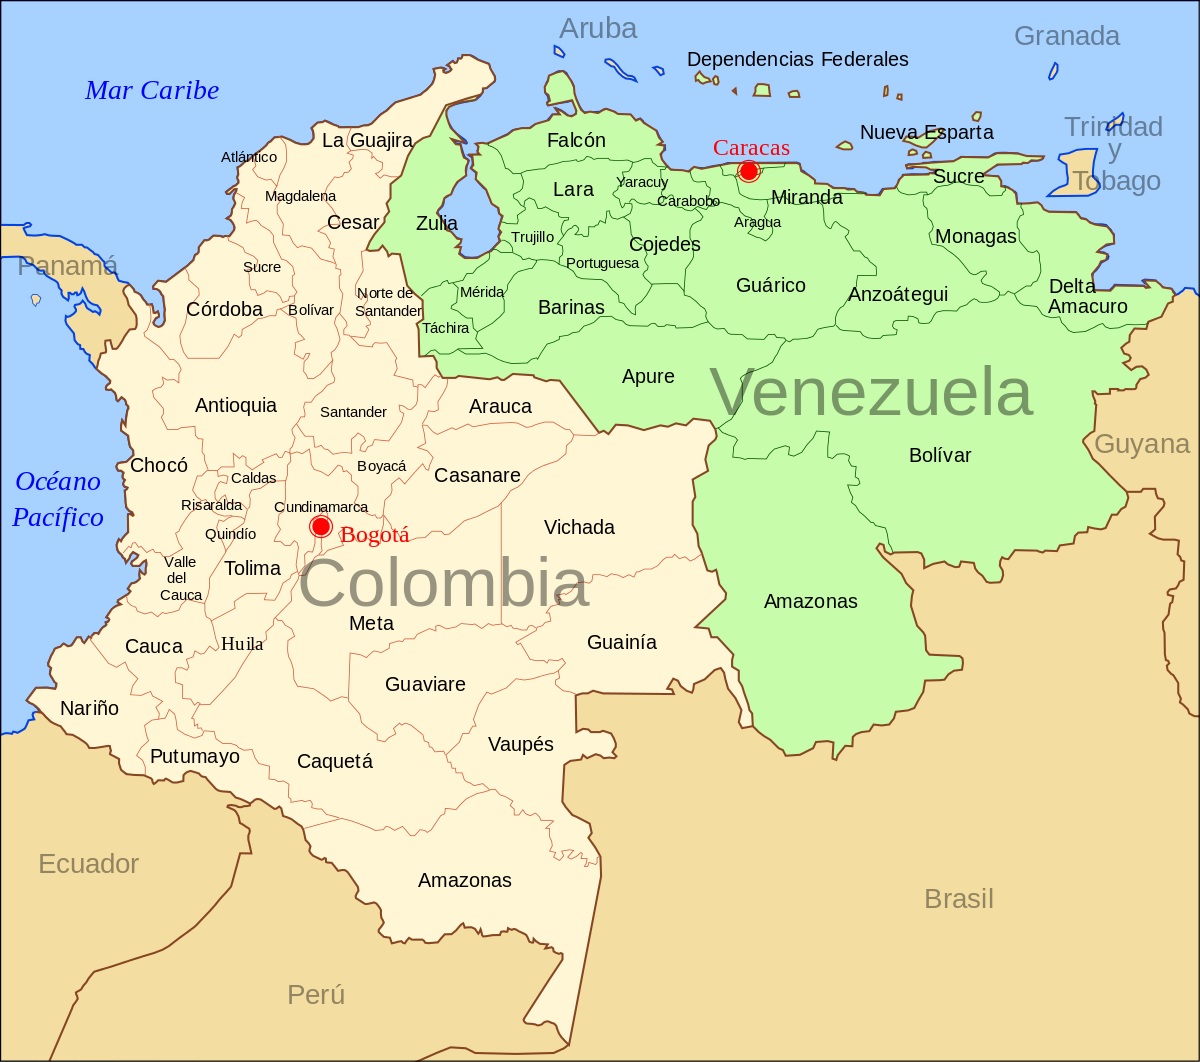 The two countries share a 2,219-kilometer border closed to the passage of vehicles since August 2015 by order of Venezuelan President Nicolás Maduro, who then broke diplomatic relations with Colombia.